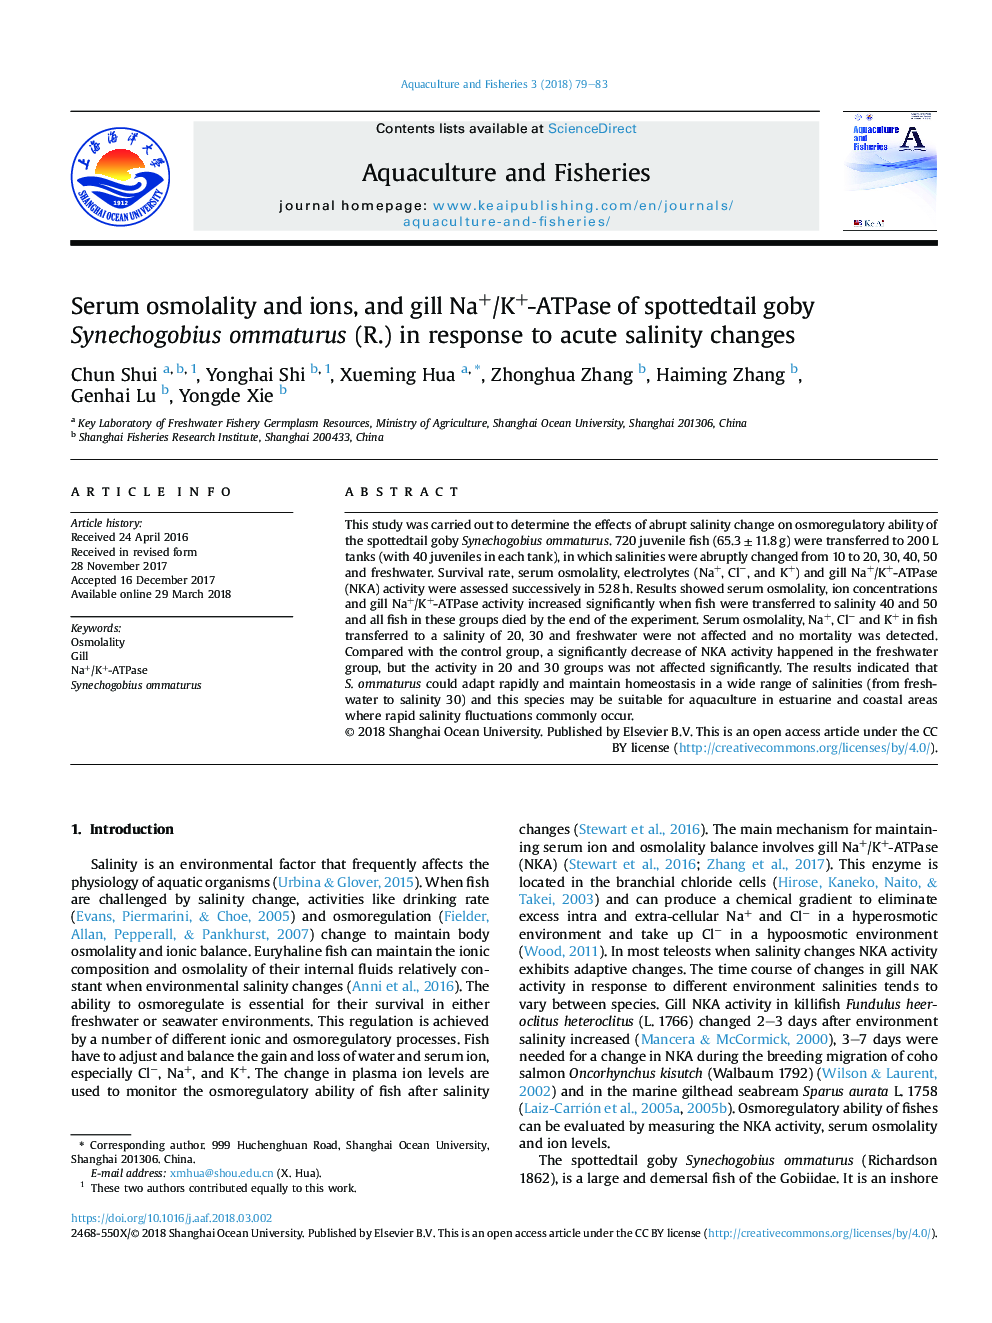 Serum osmolality and ions, and gill Na+/K+-ATPase of spottedtail goby Synechogobius ommaturus (R.) in response to acute salinity changes